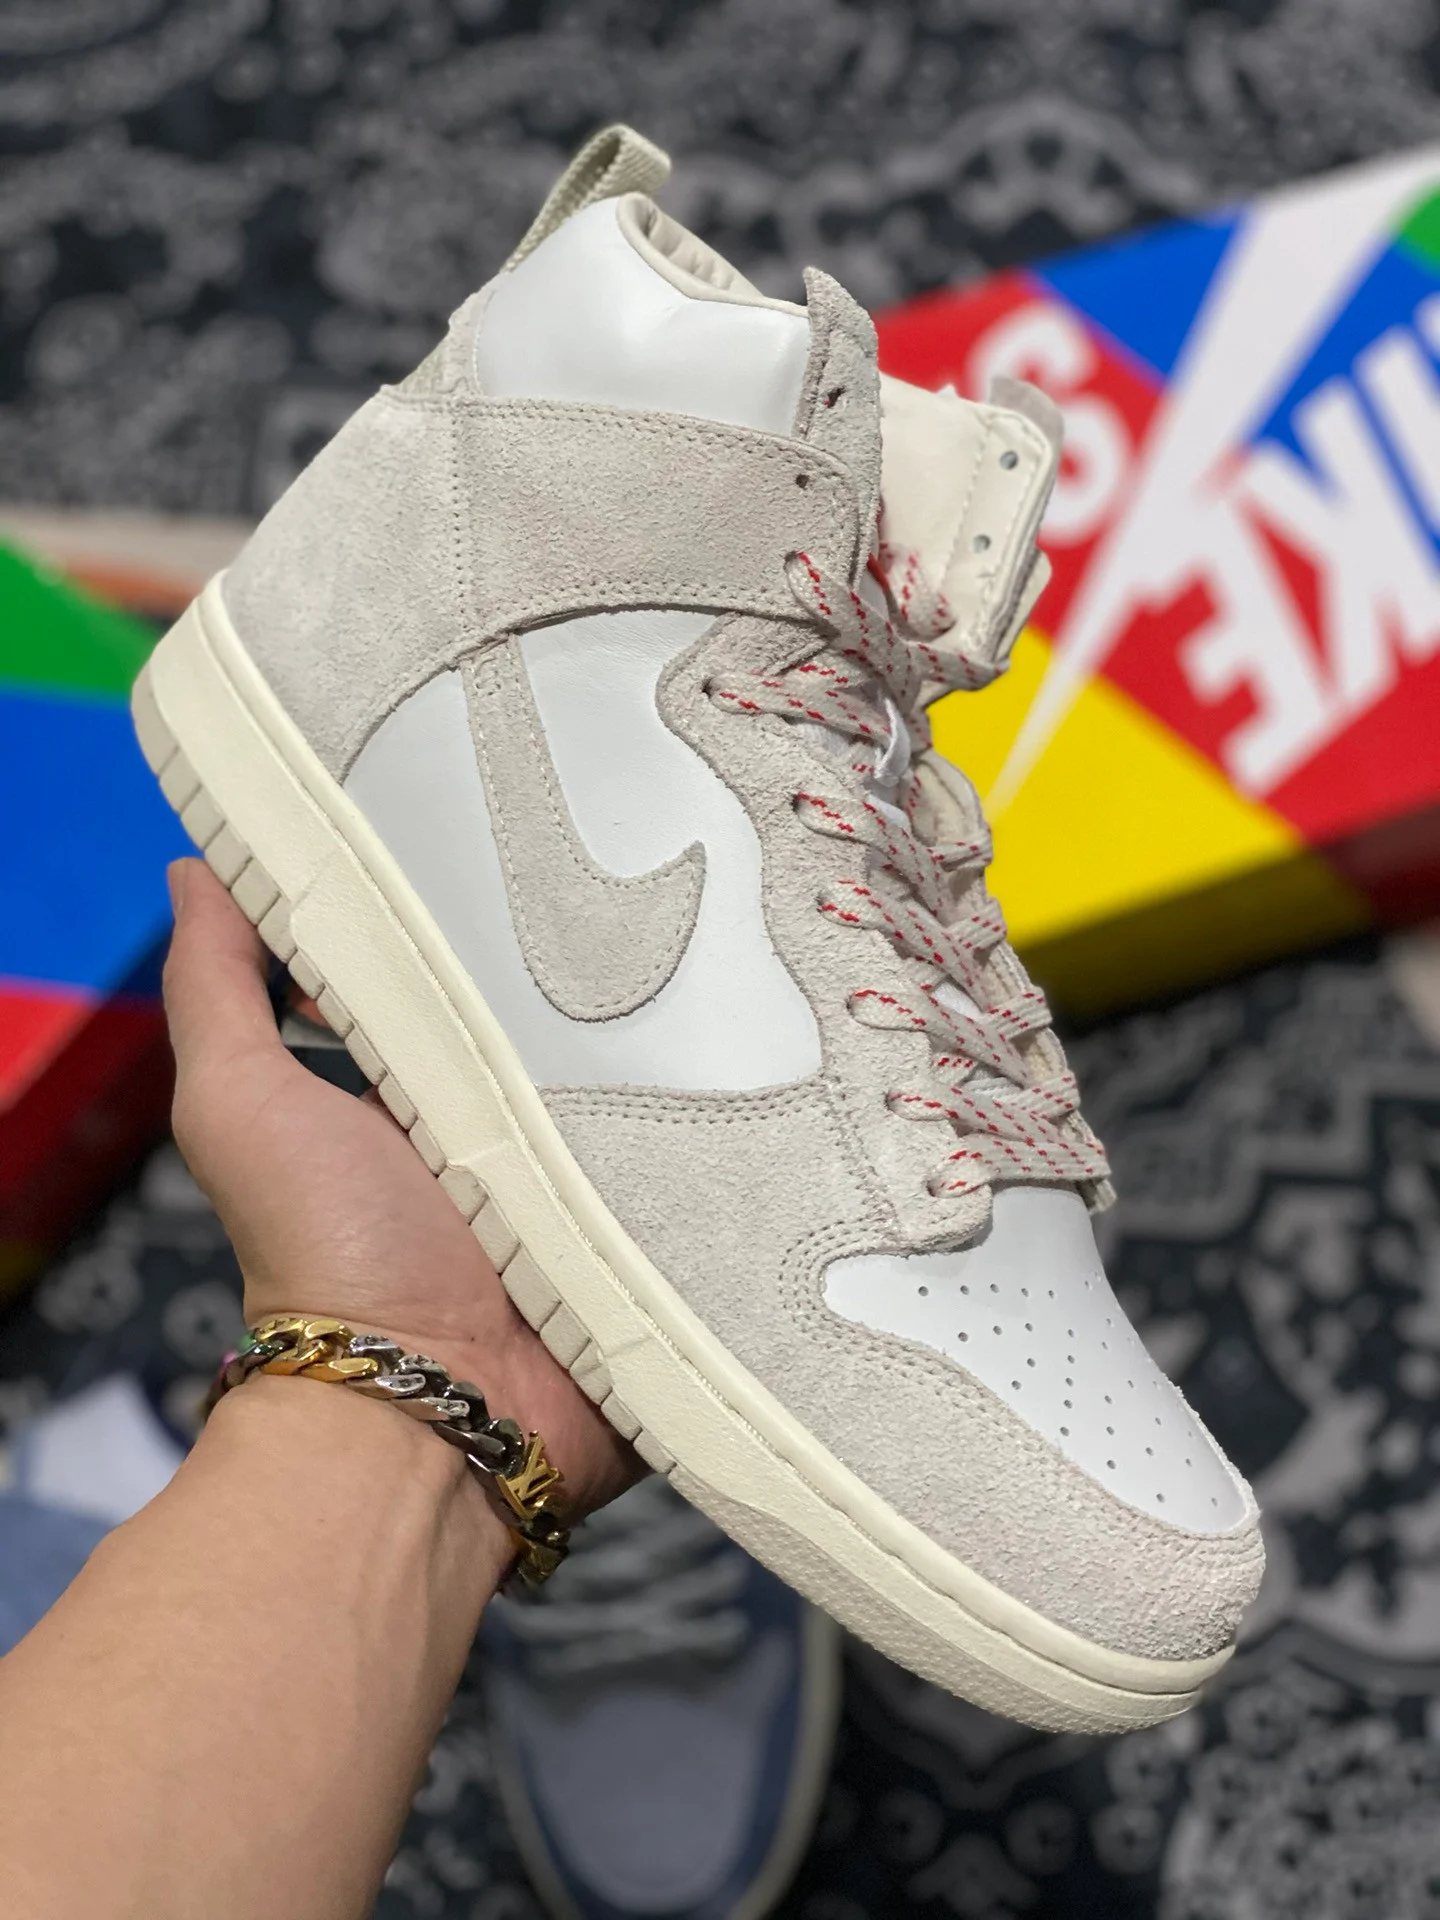 Notre x Nike Dunk High Light Orewood Brown CW3092-100 For Sale